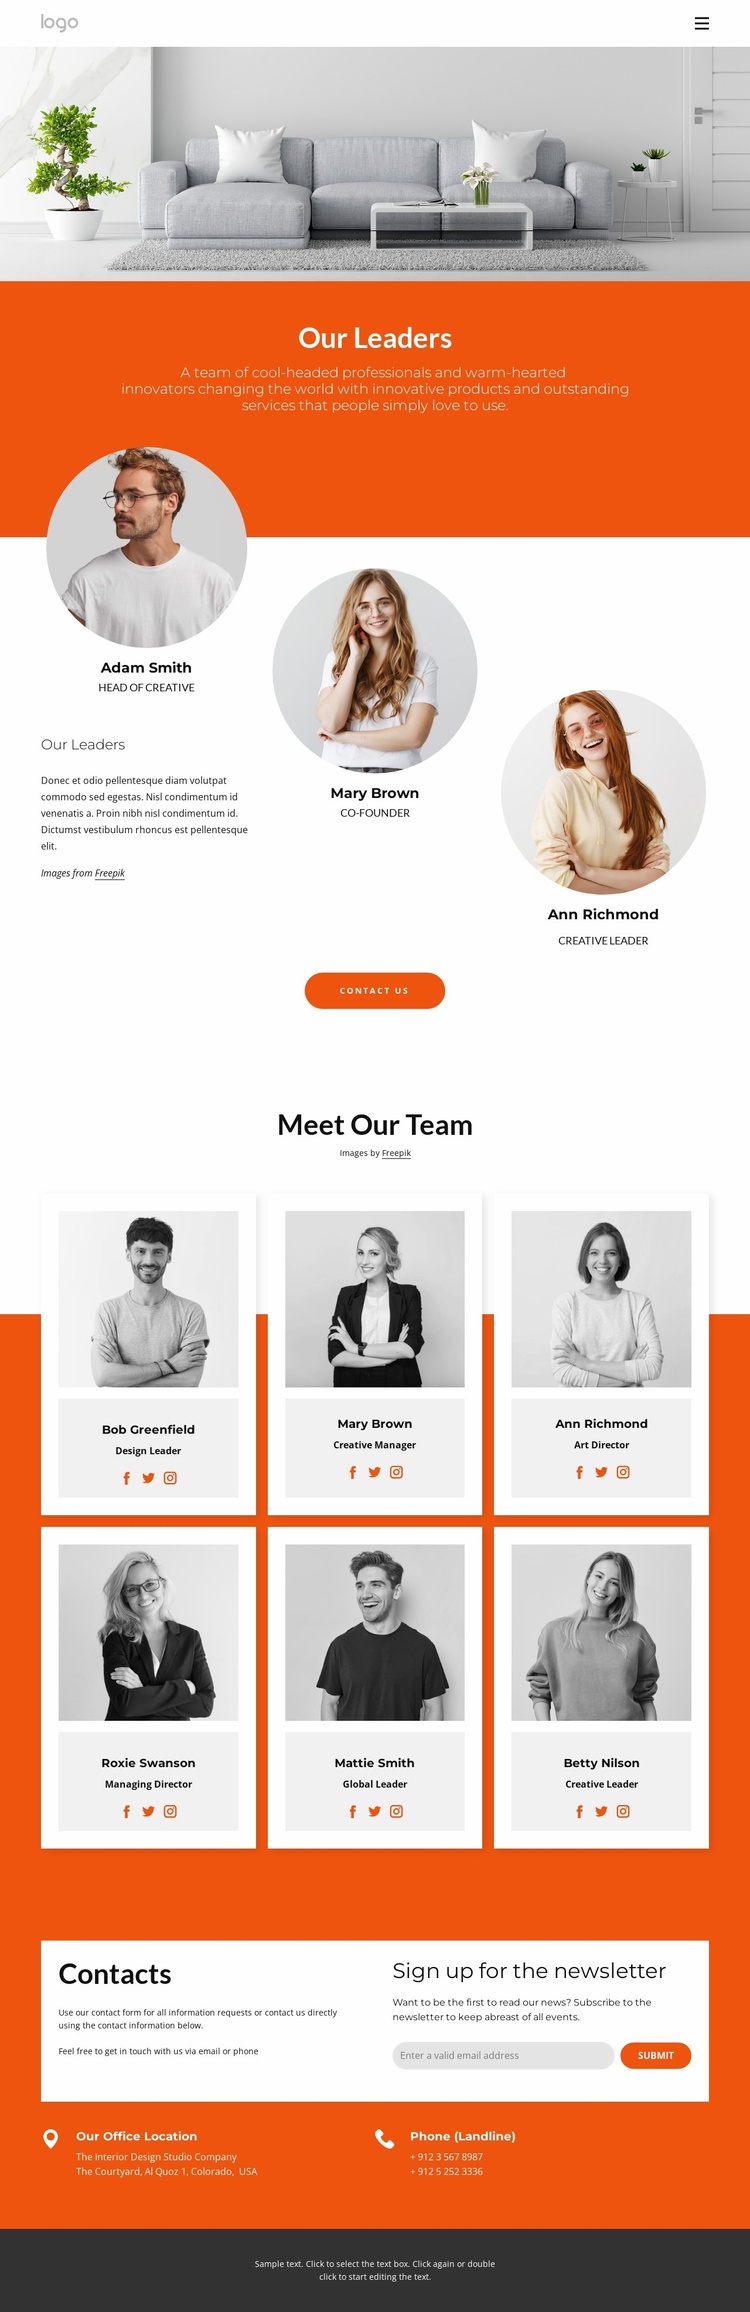 Our great team eCommerce Website Design